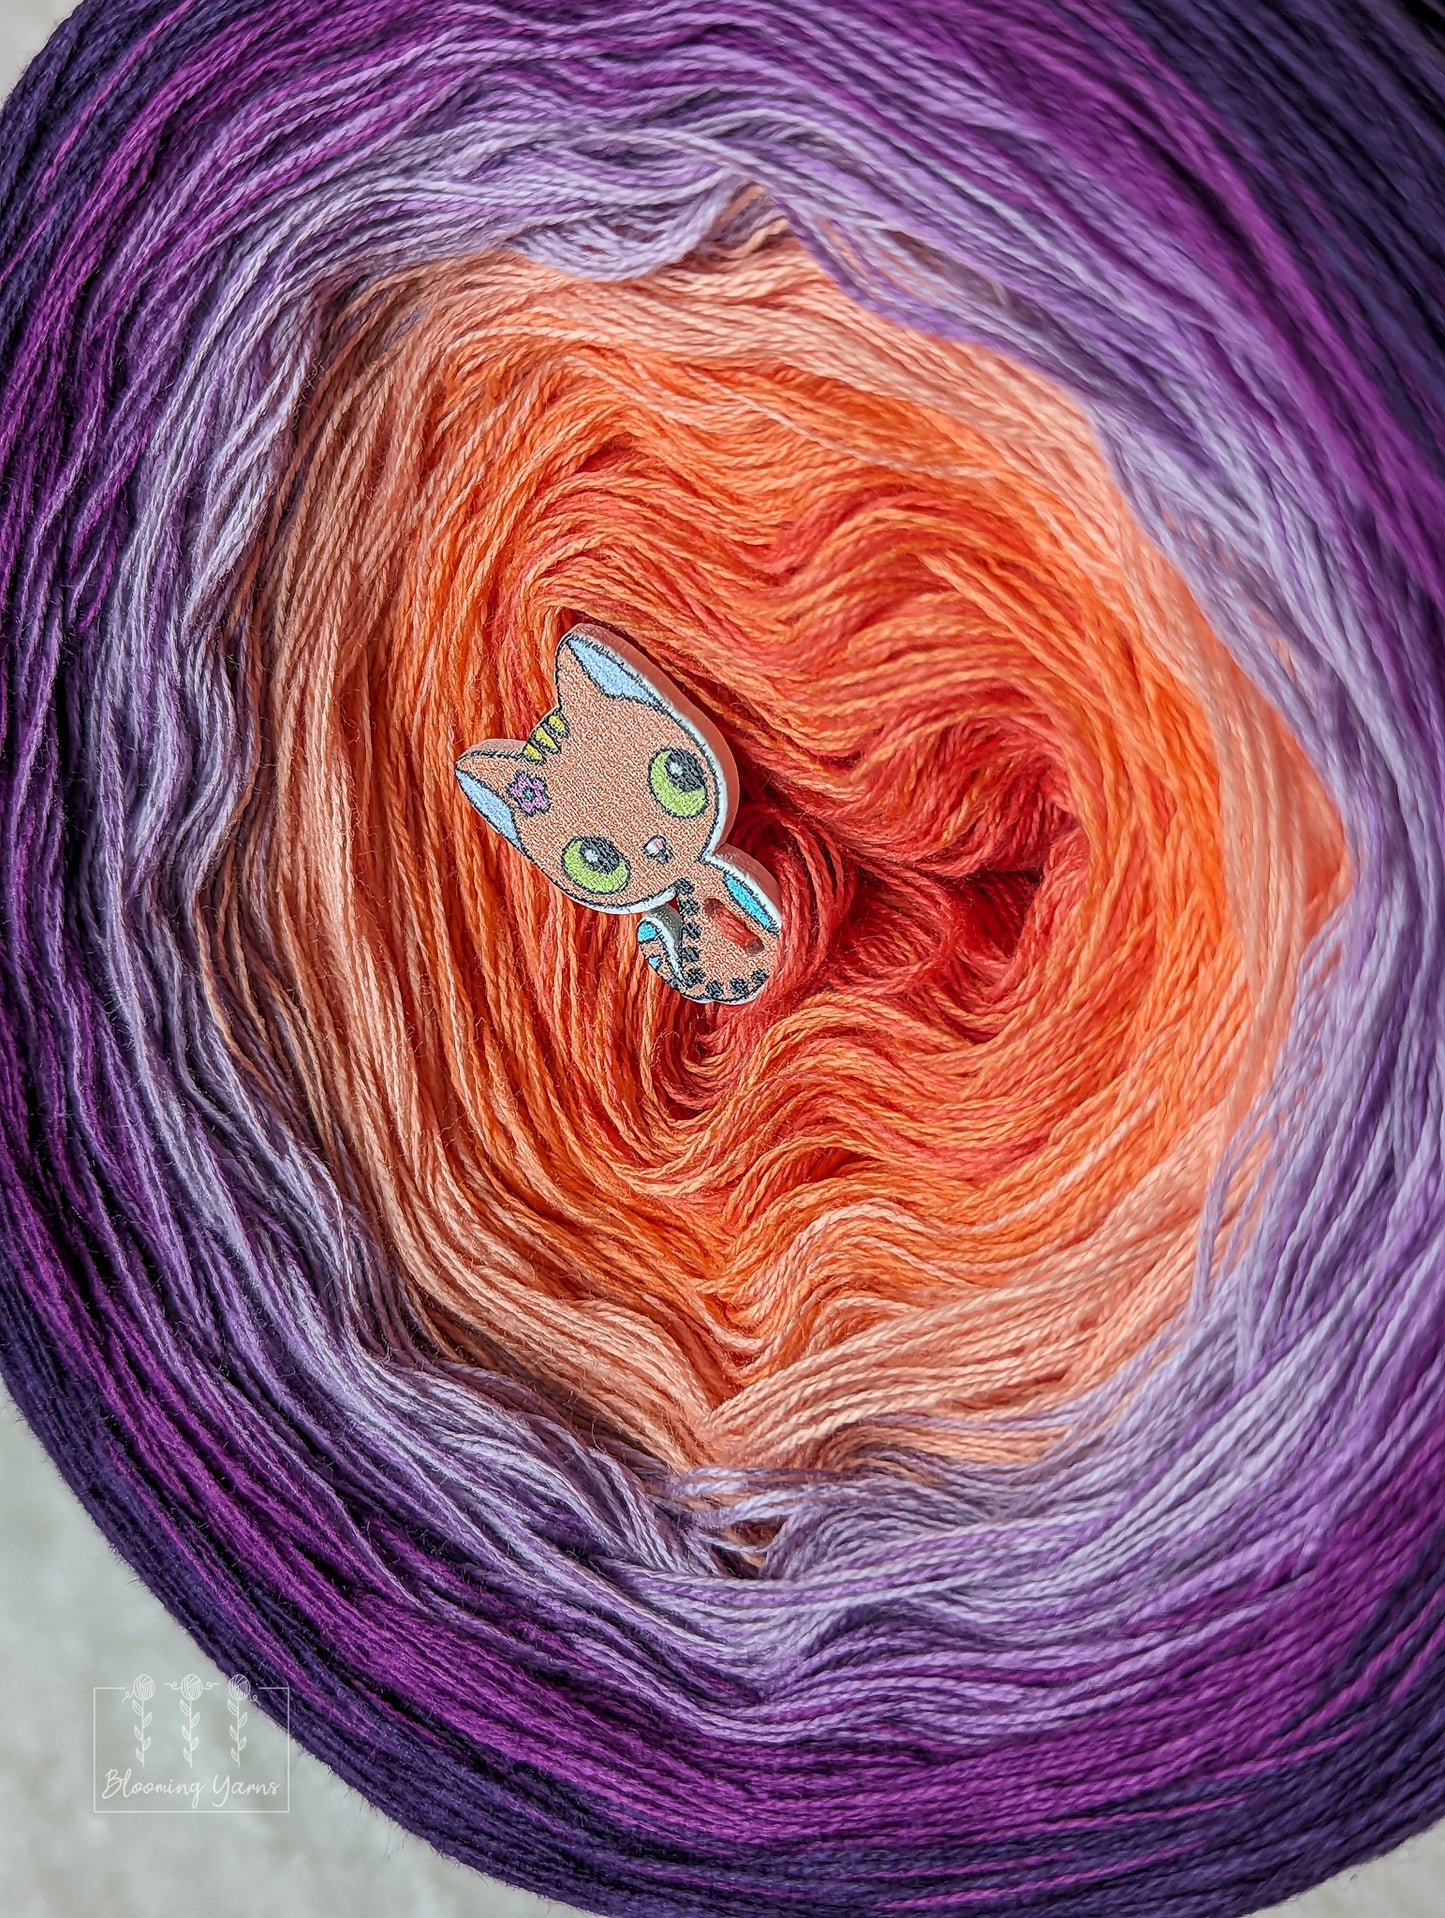 "Coral reef" gradient ombre yarn cake created by Ancy-Fancy